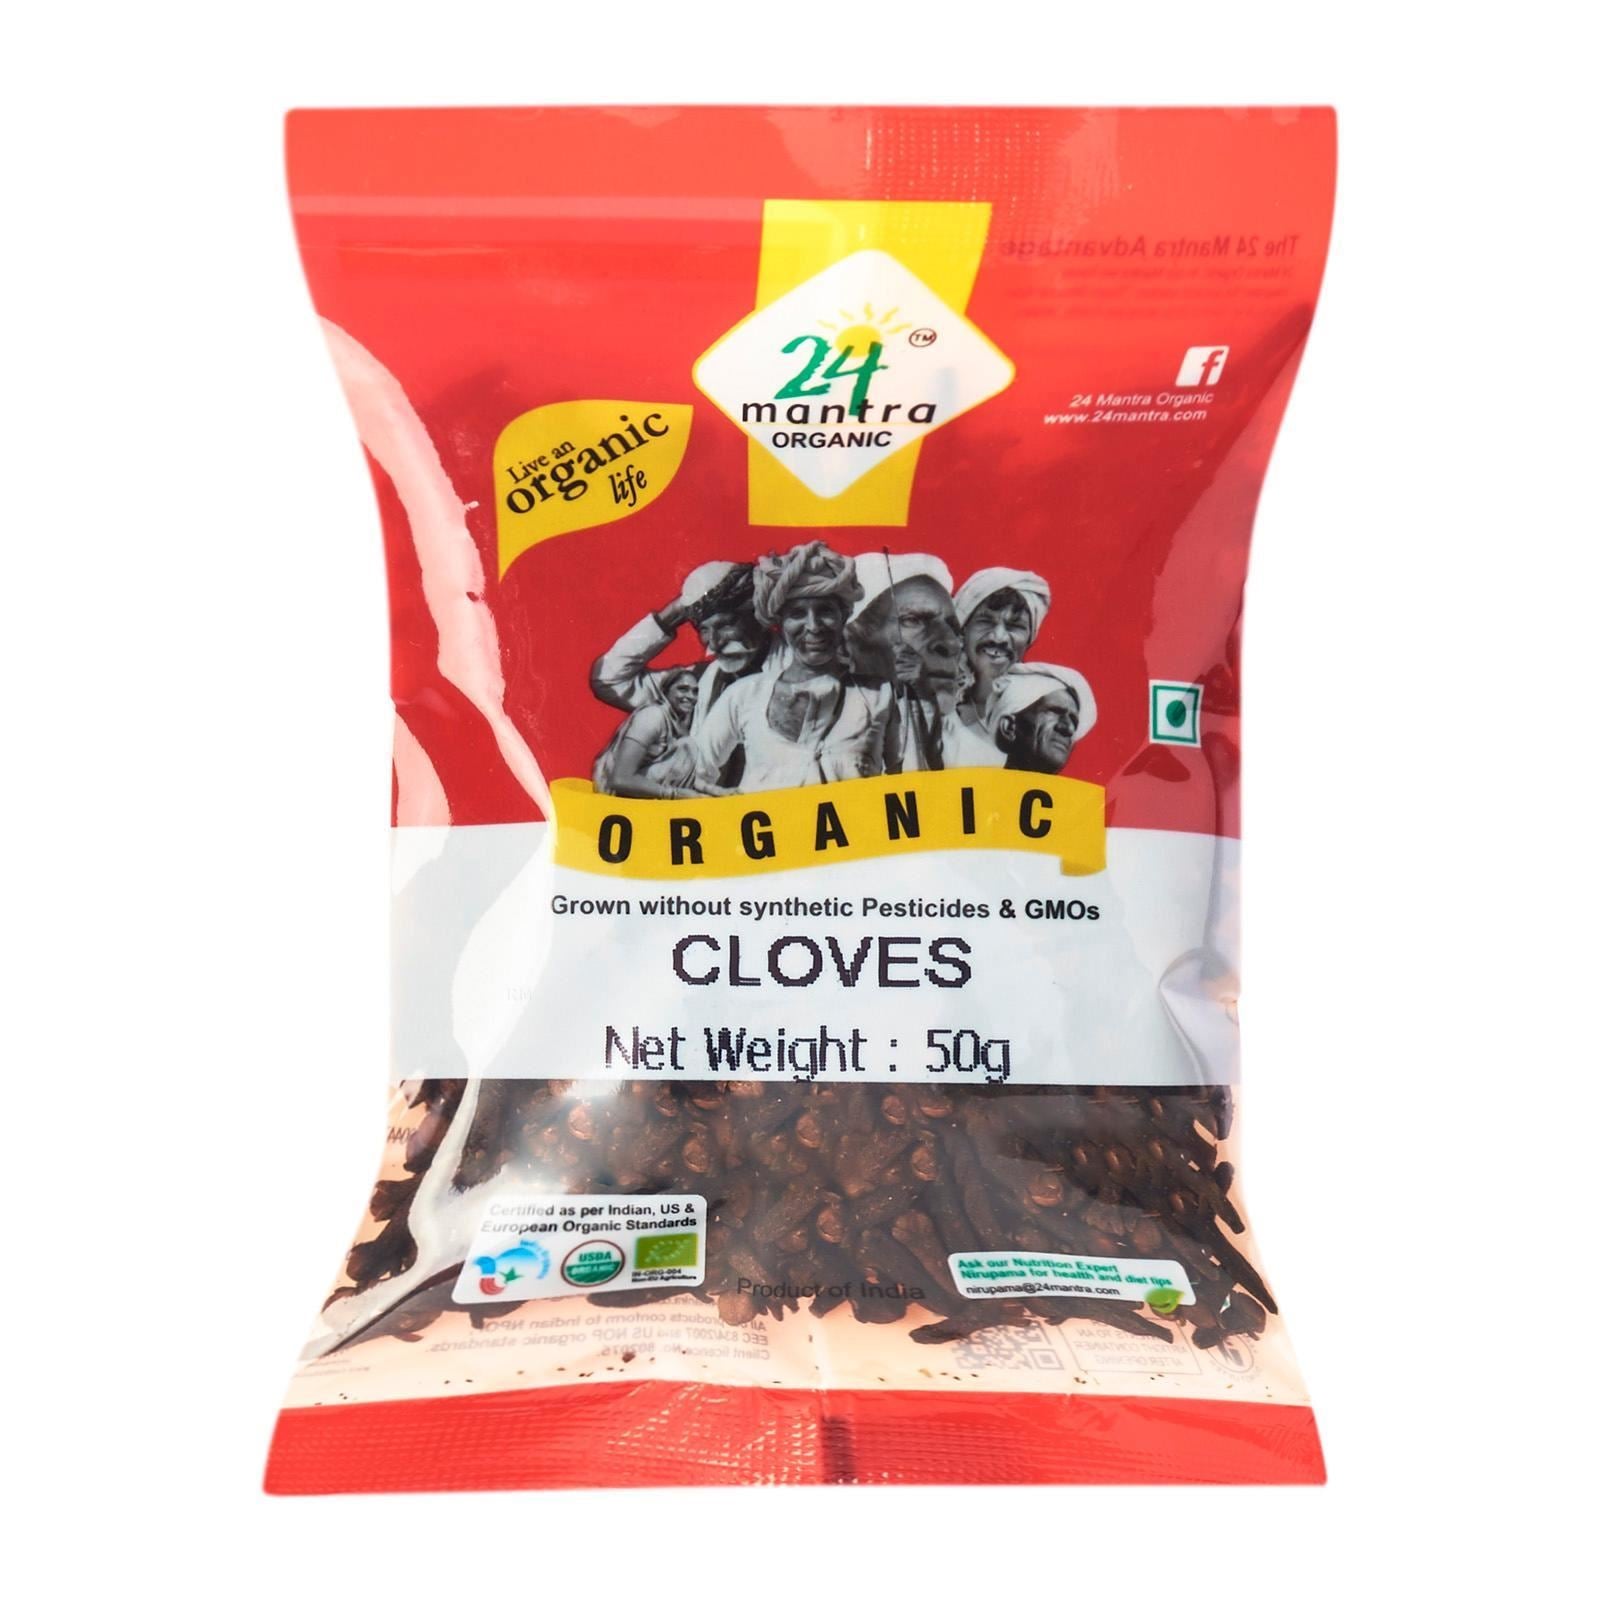 24 MANTRA Cloves (Certified ORGANIC)